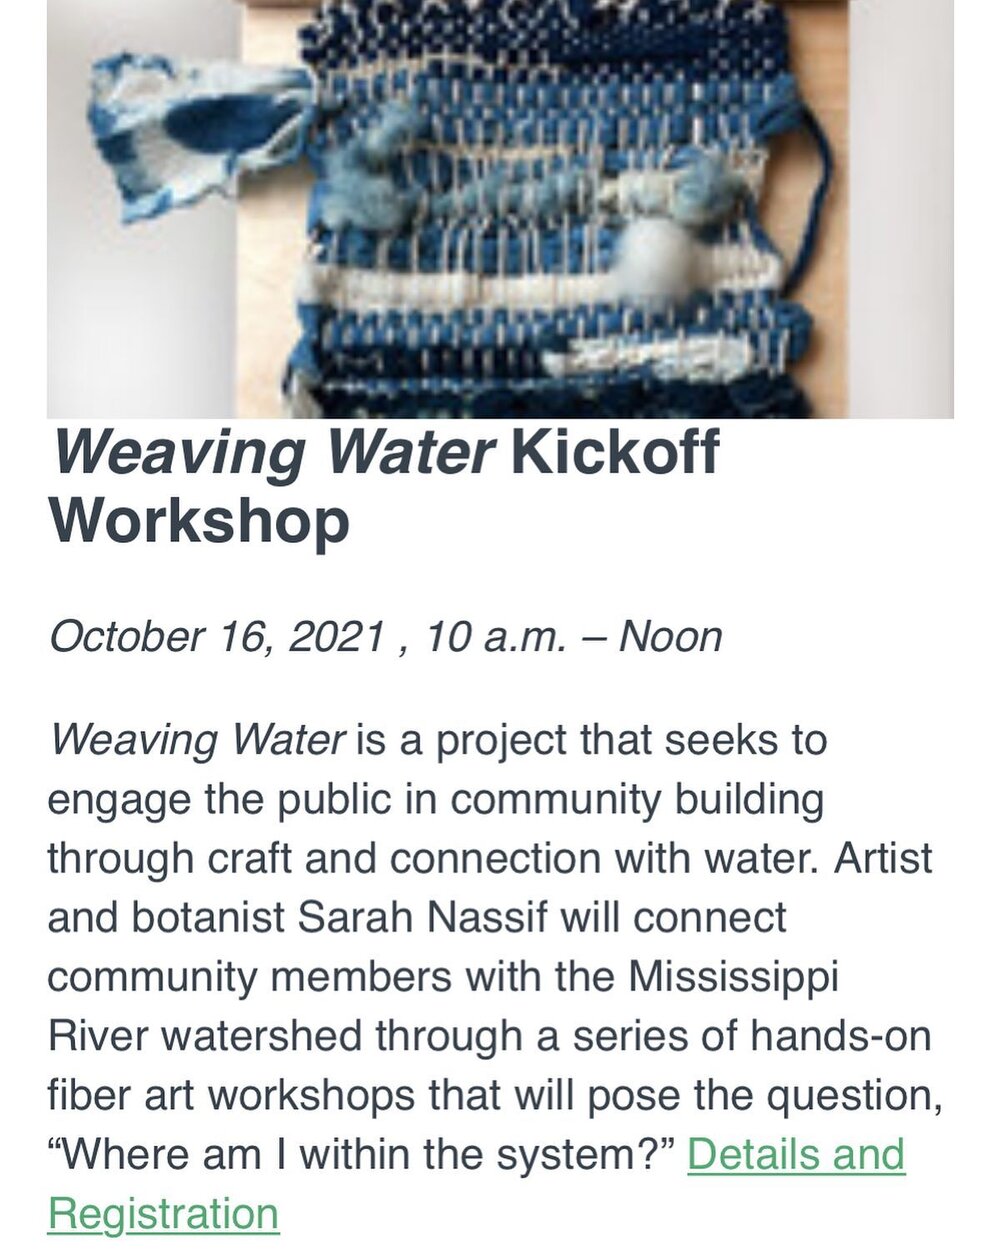 FREE WORKSHOP ANNOUNCEMENT. Sign up for indigo and fiber fun, stress relief and friend making with the river and other indigo and fiber curious folks! Oct 16 workshop will introduce a couple threads (more puns to come, can&rsquo;t help it): how fiber